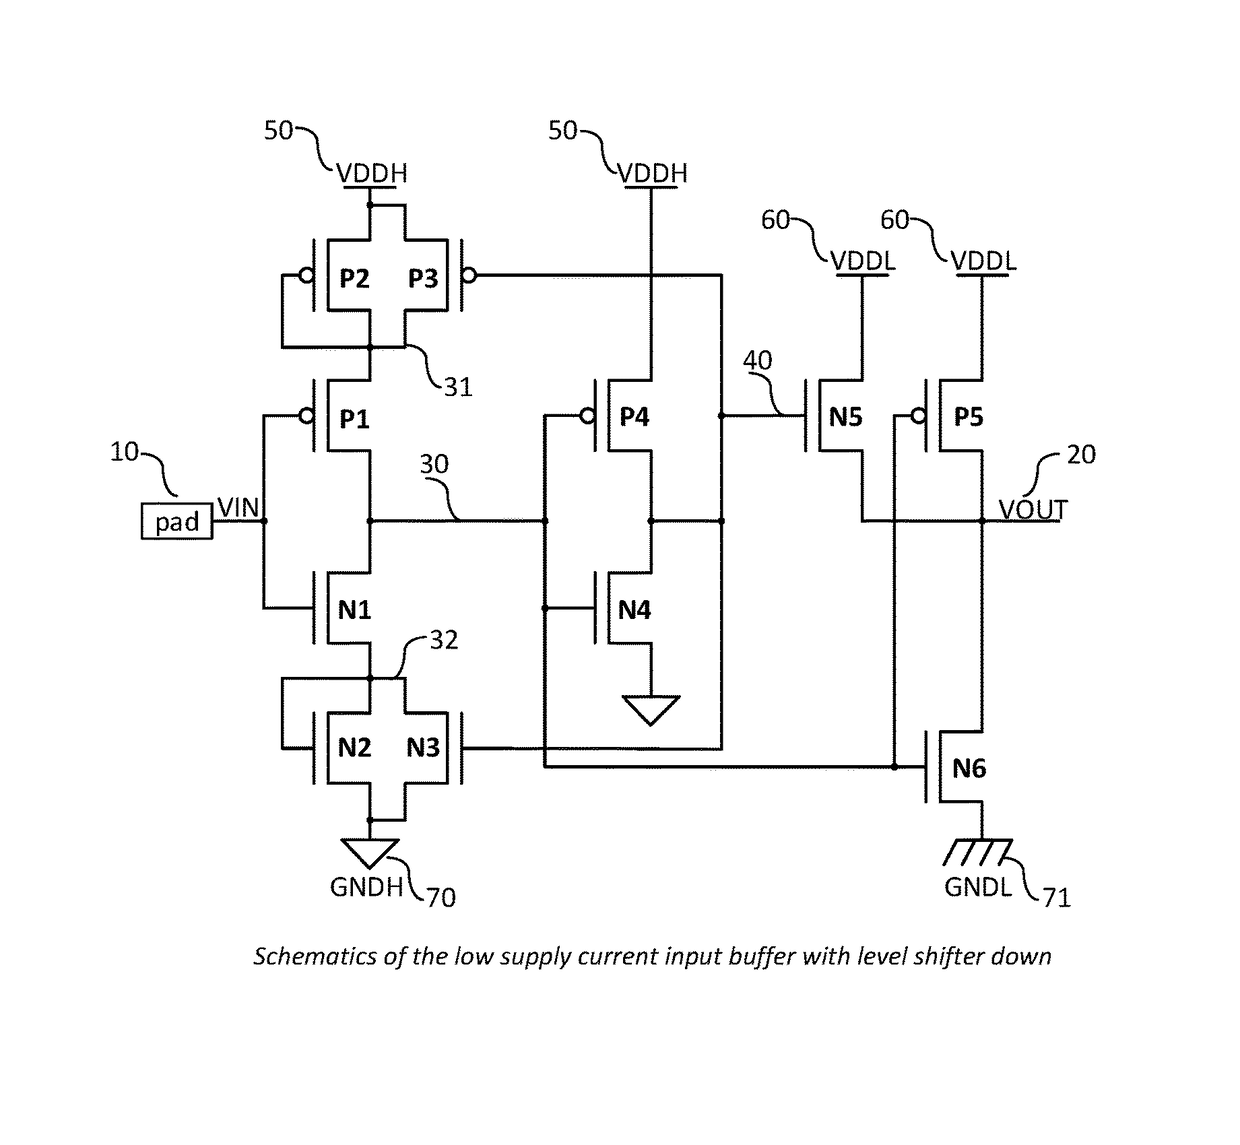 CMOS input buffer with low supply current and voltage down shifting